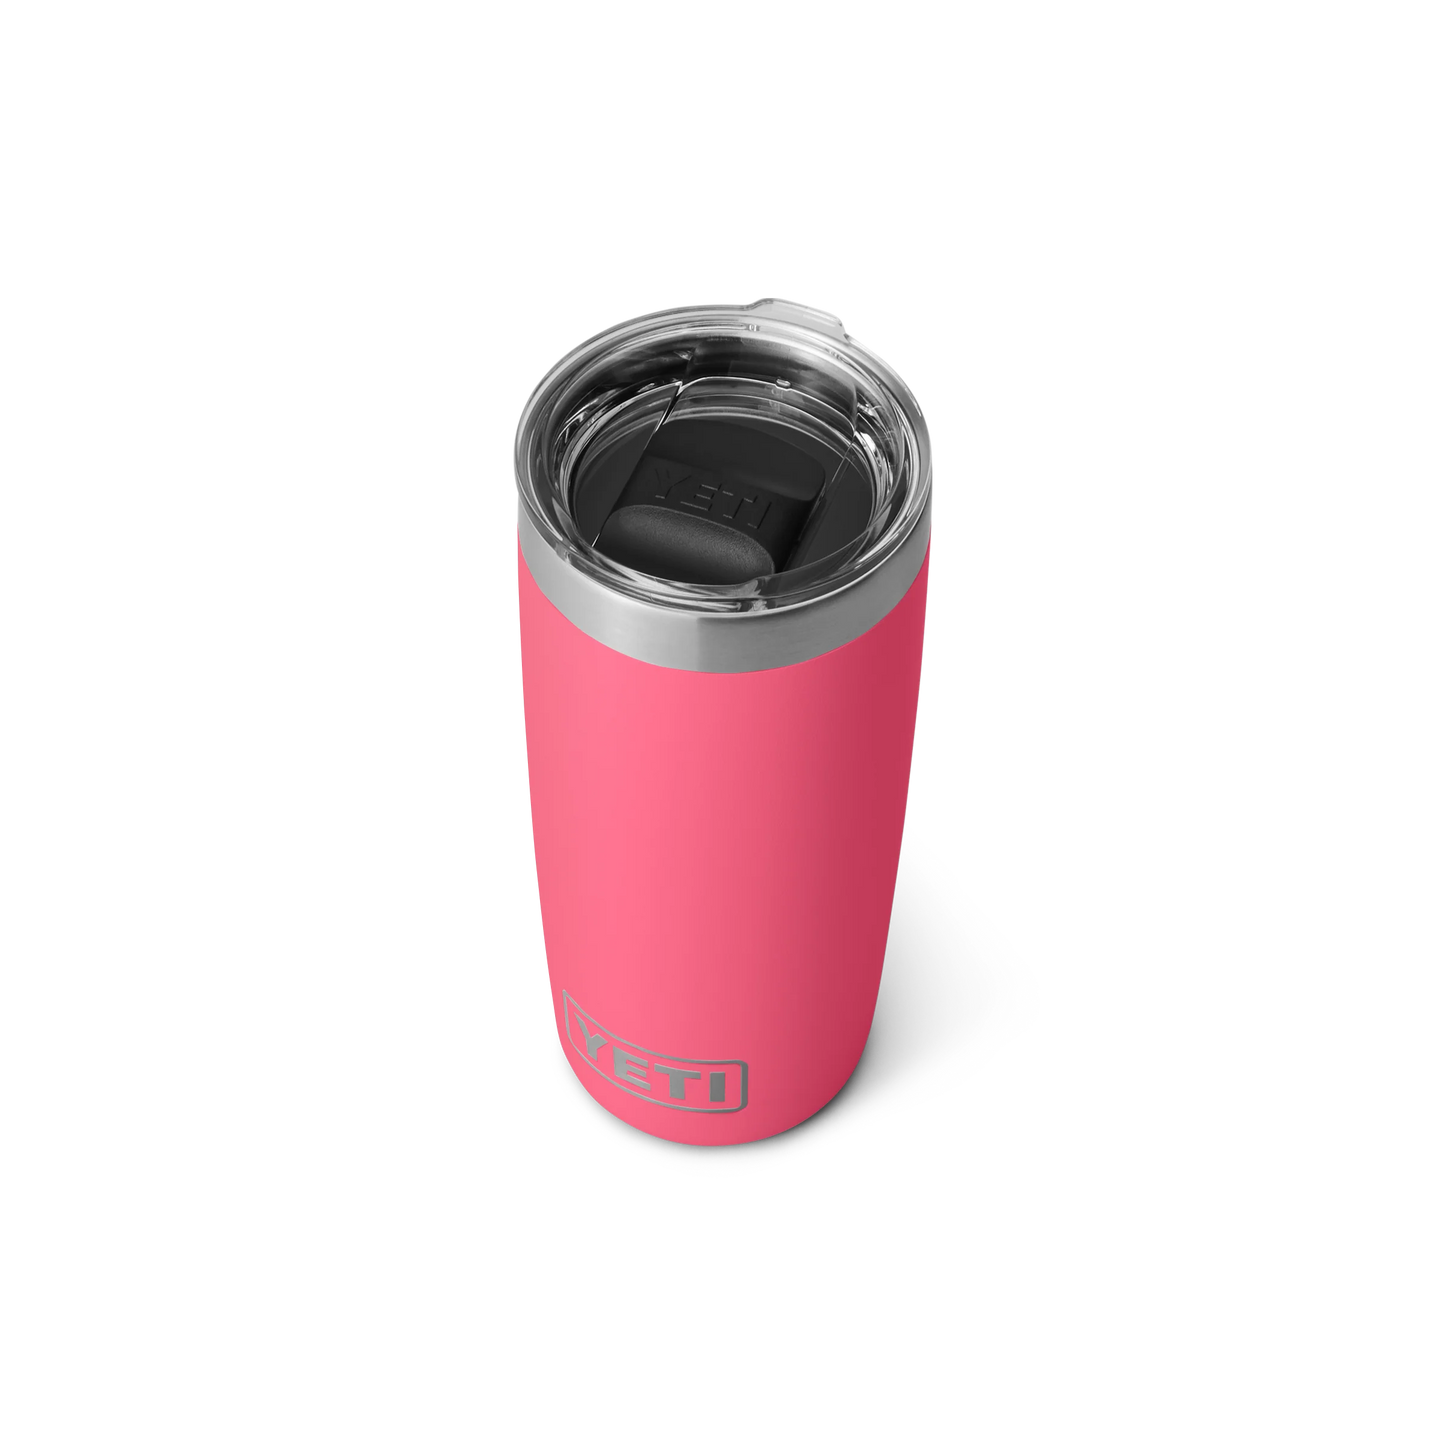 Yeti Tumbler 10oz (295ml) with Magslider Lid-Coolers & Drinkware-Yeti-Tropical Pink-Fishing Station